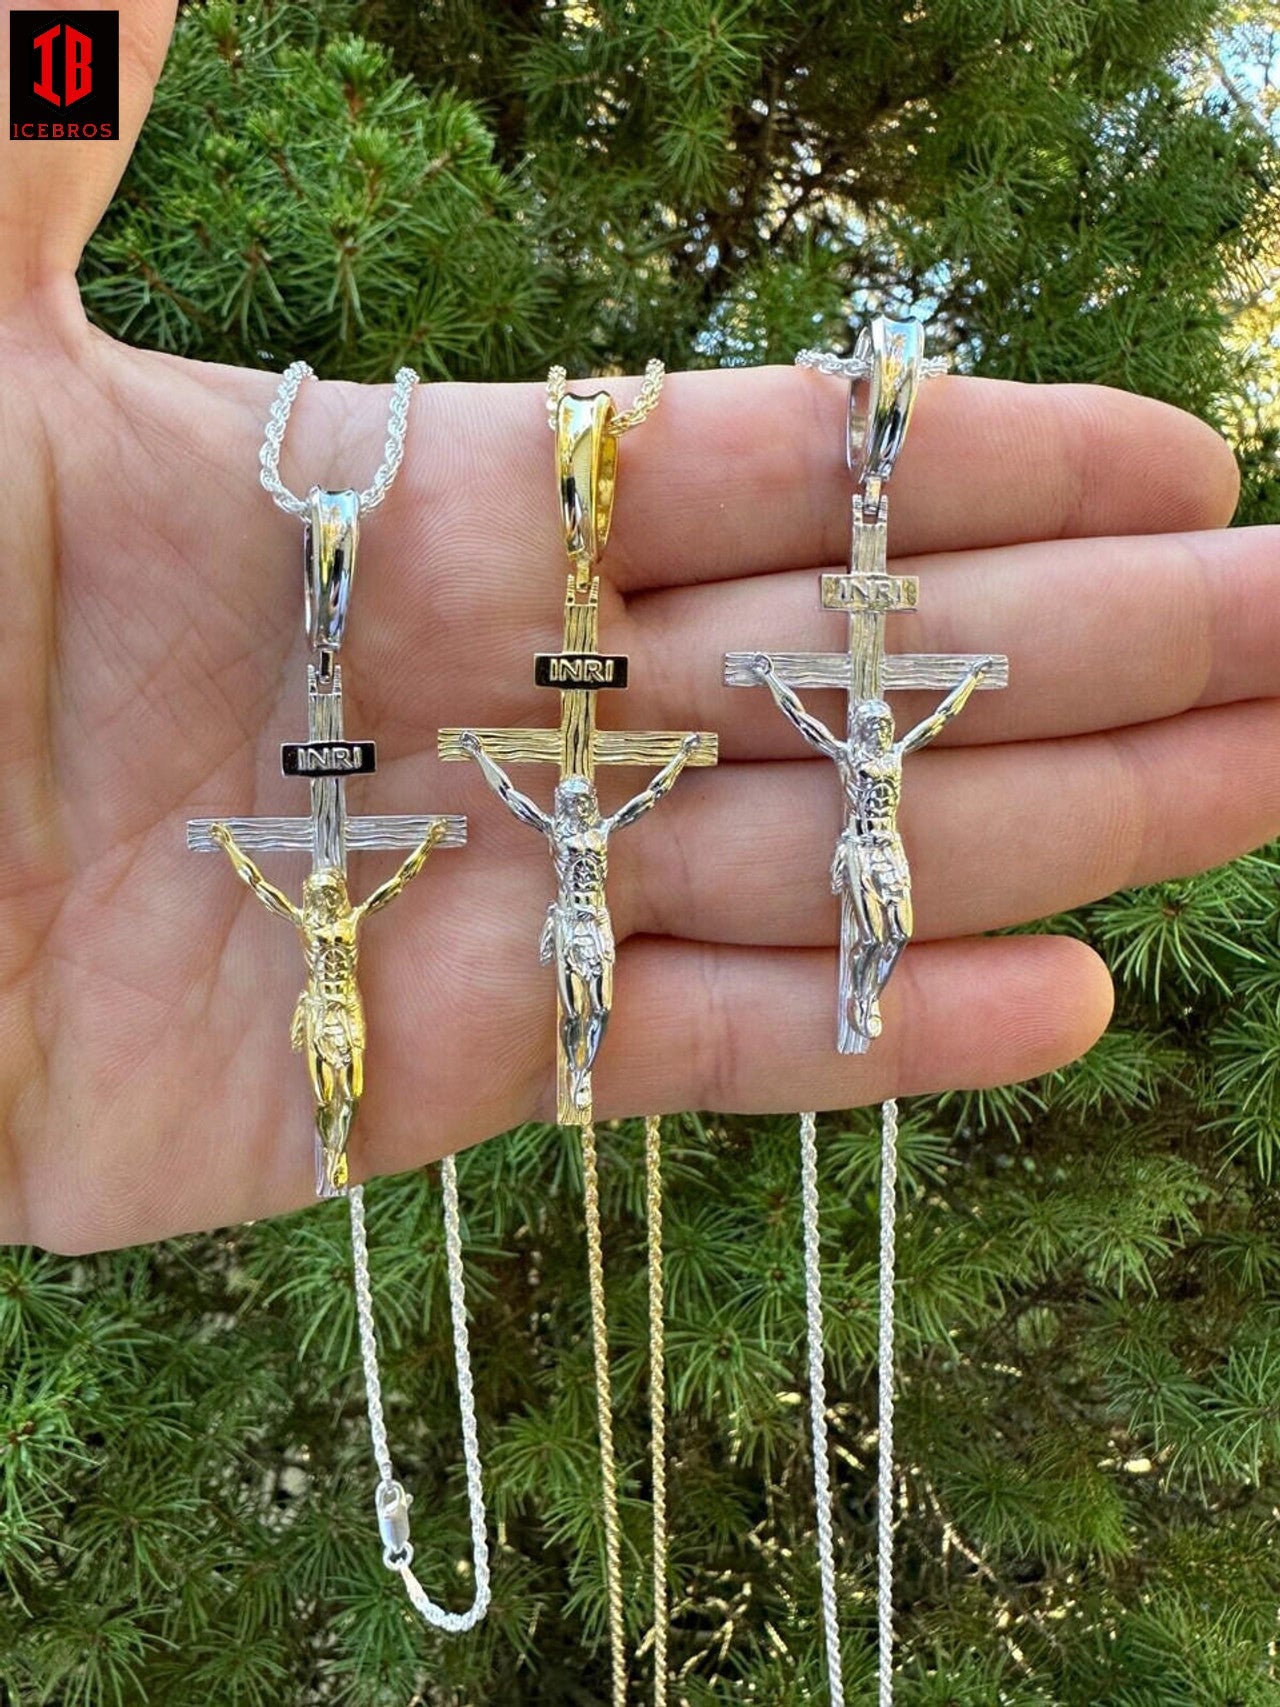 : Hand holding three crucifixes, including a Cross Jesus Pendant